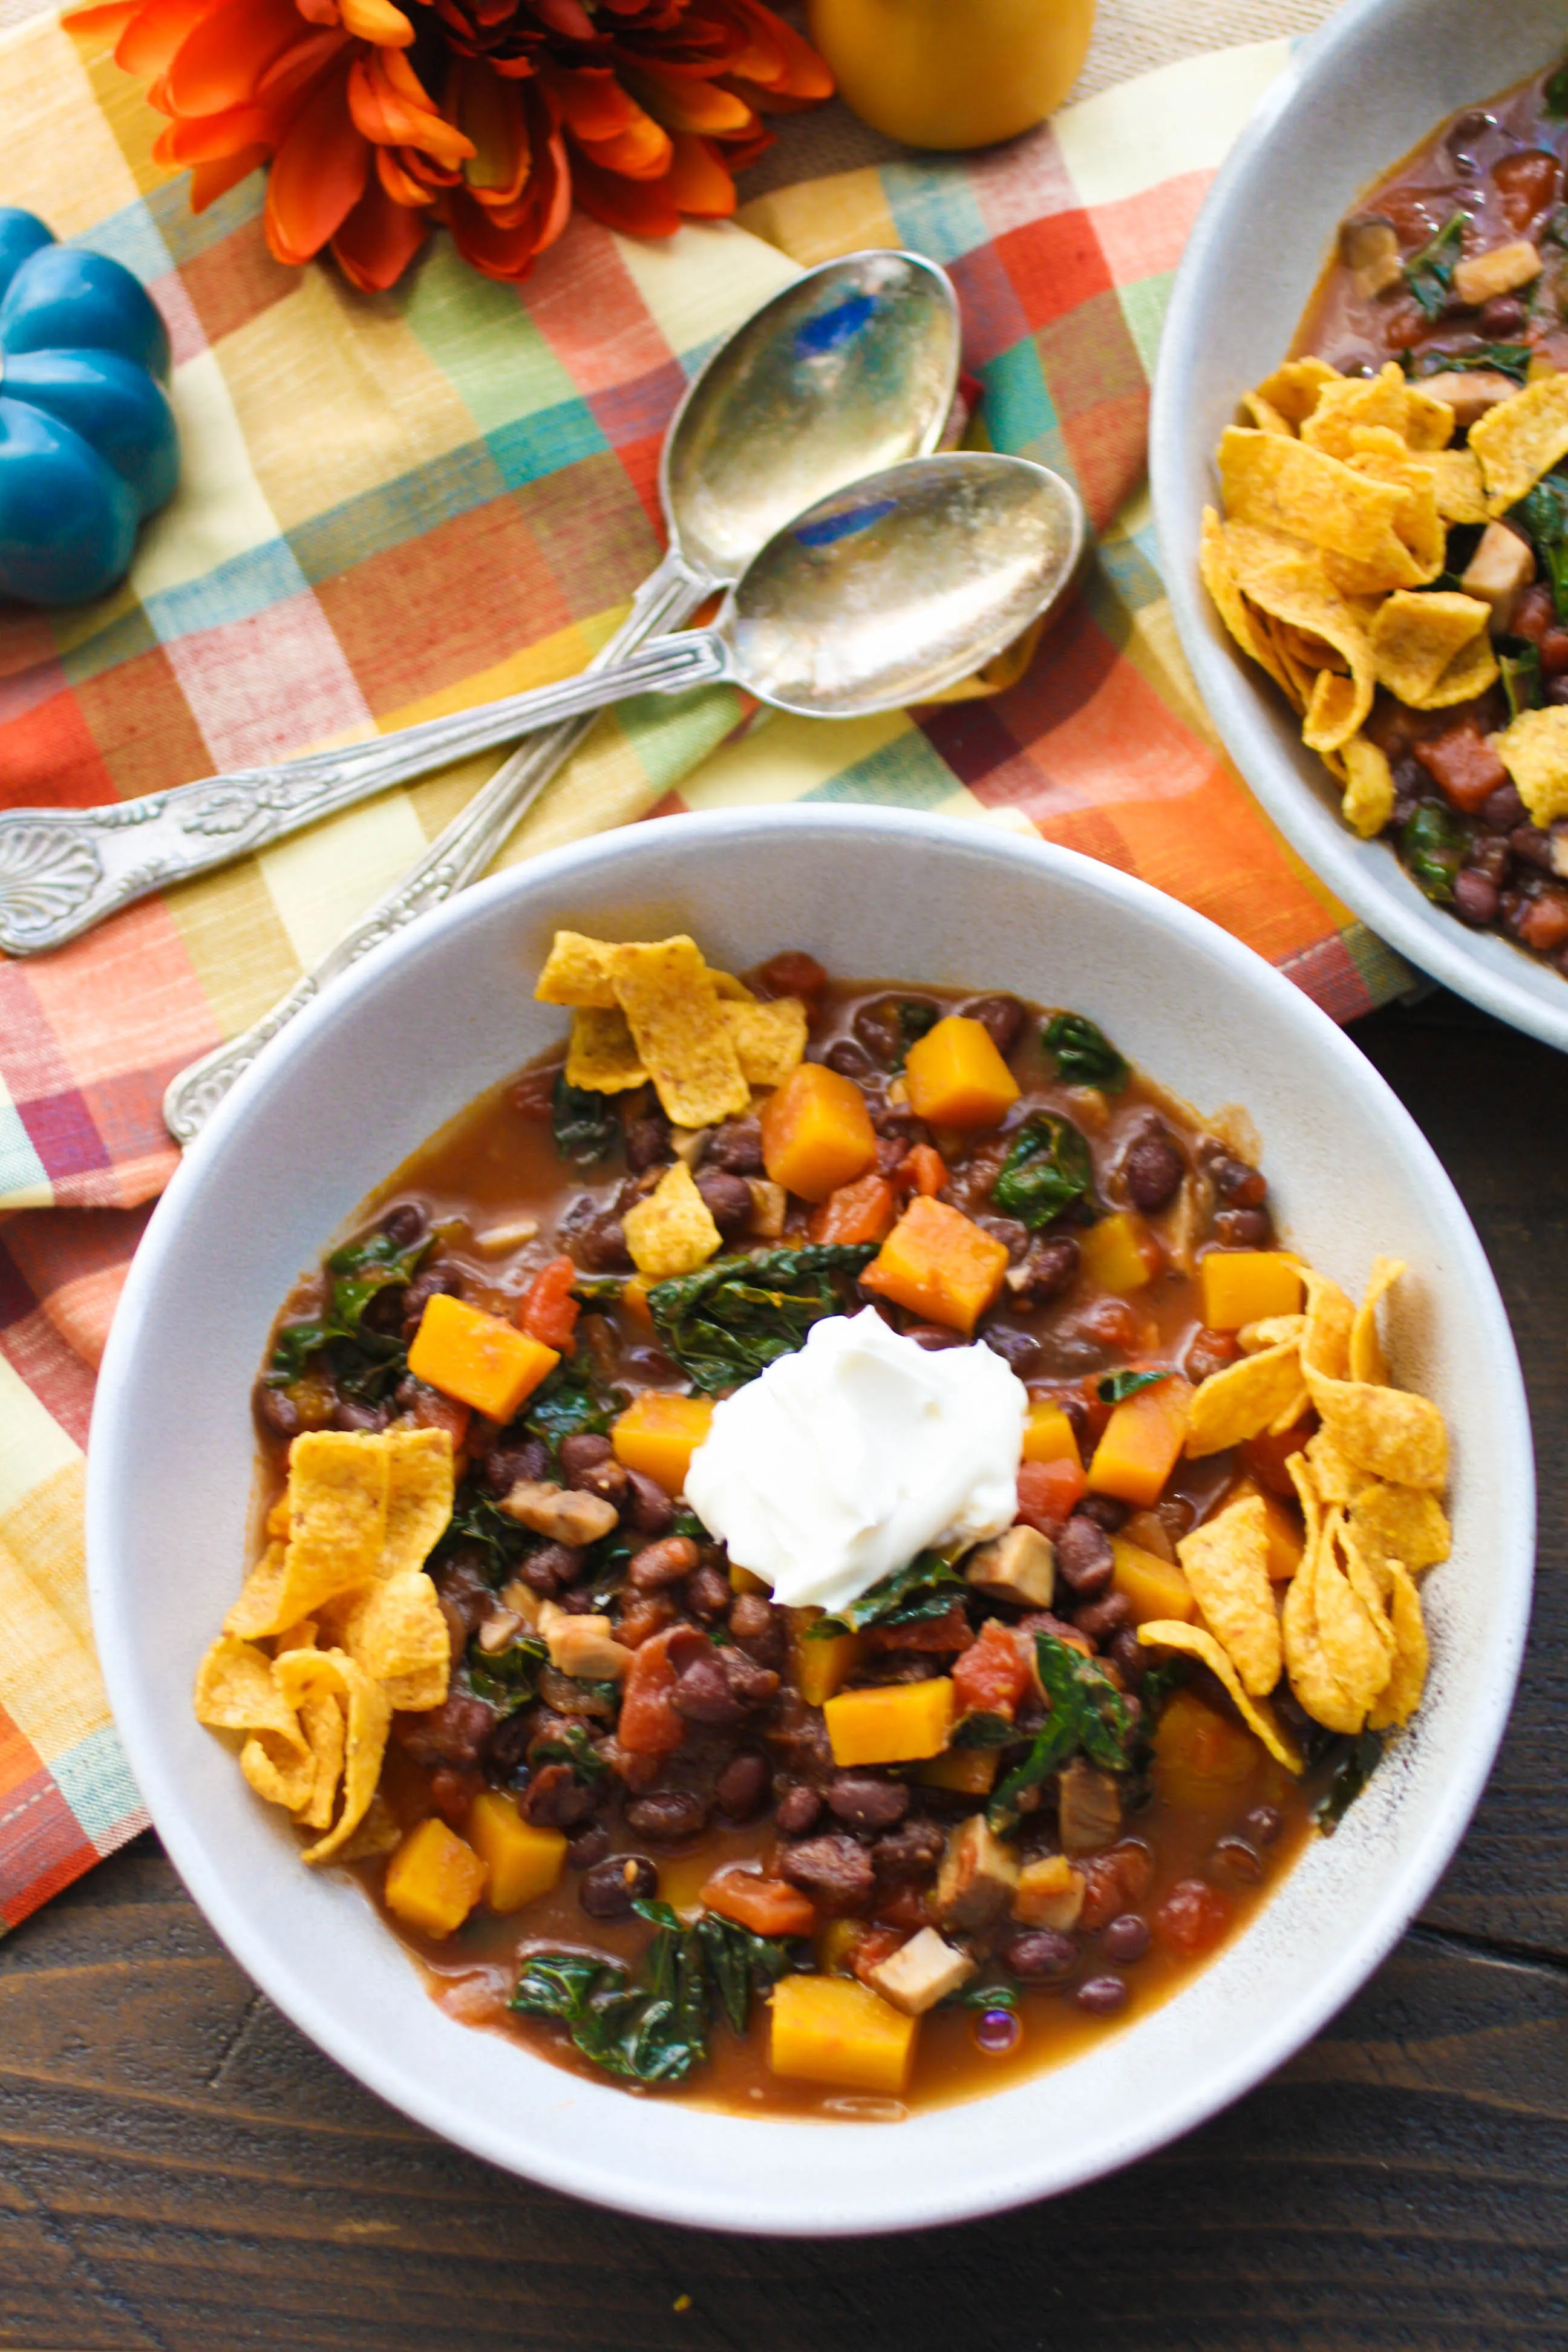 Grab a spoon and dig in to Butternut Squash and Black Bean Chili with Mushrooms & Kale. This recipe for Butternut Squash and Black Bean Chili with Mushrooms & Kale is ideal for Meatless Monday, or any night!